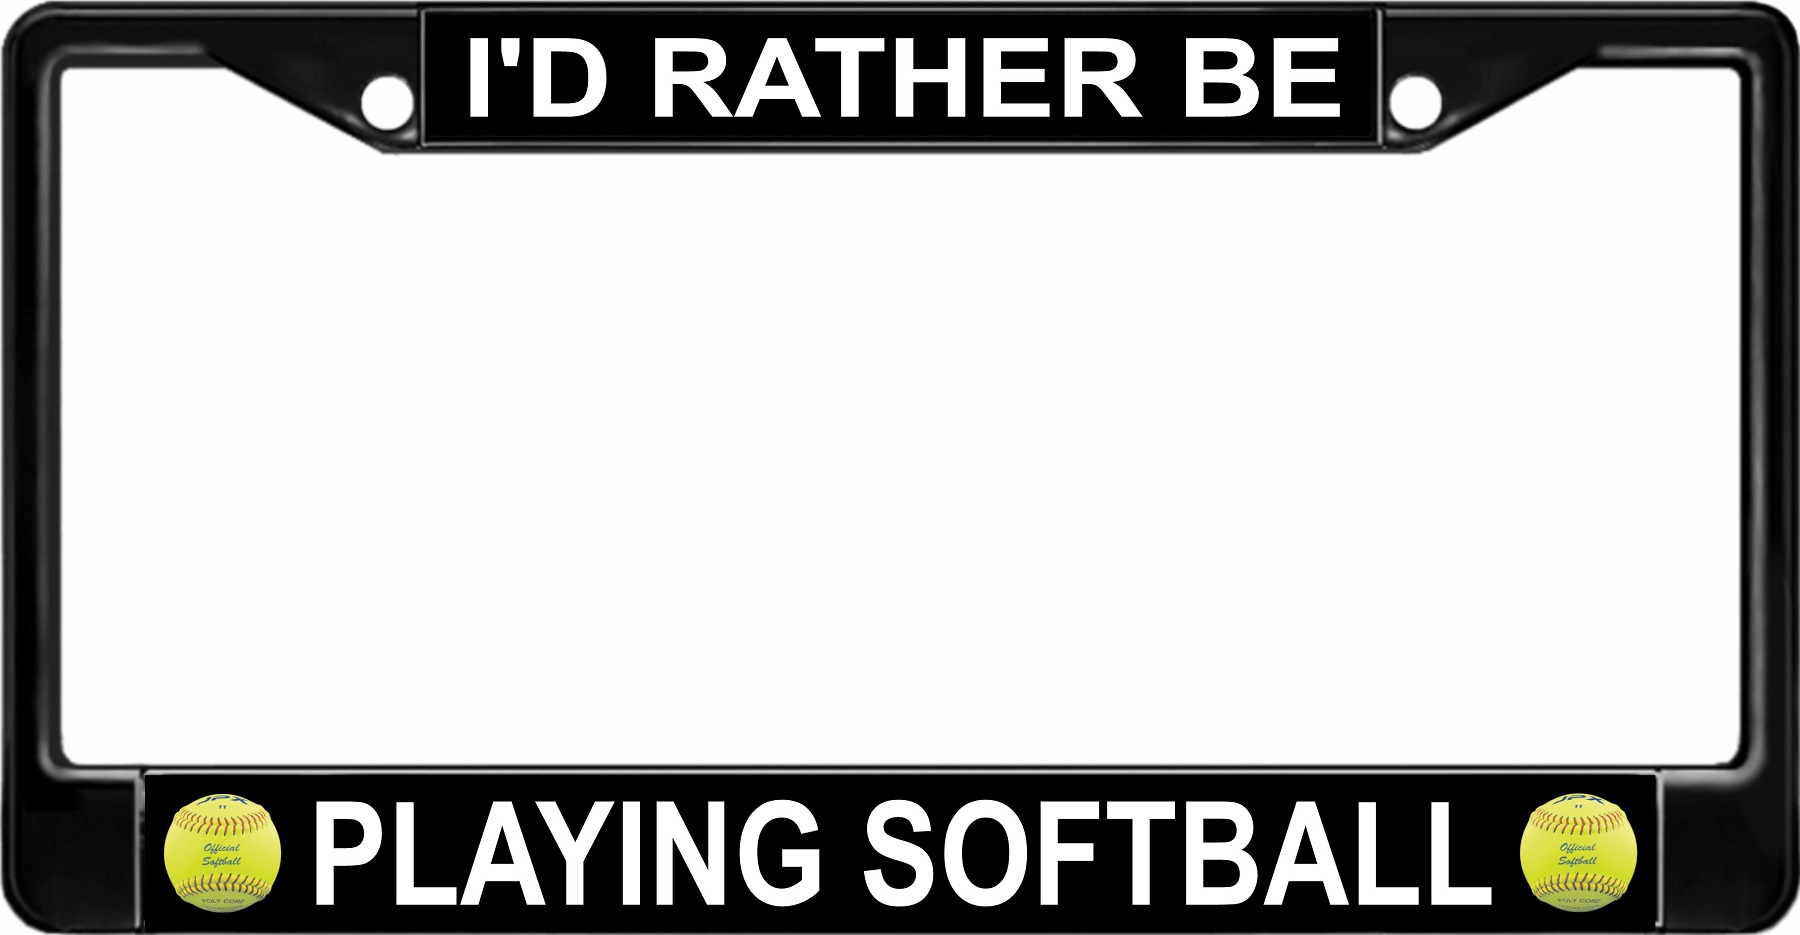 I'd Rather Be Playing SOFTBALL Black License Plate Frame